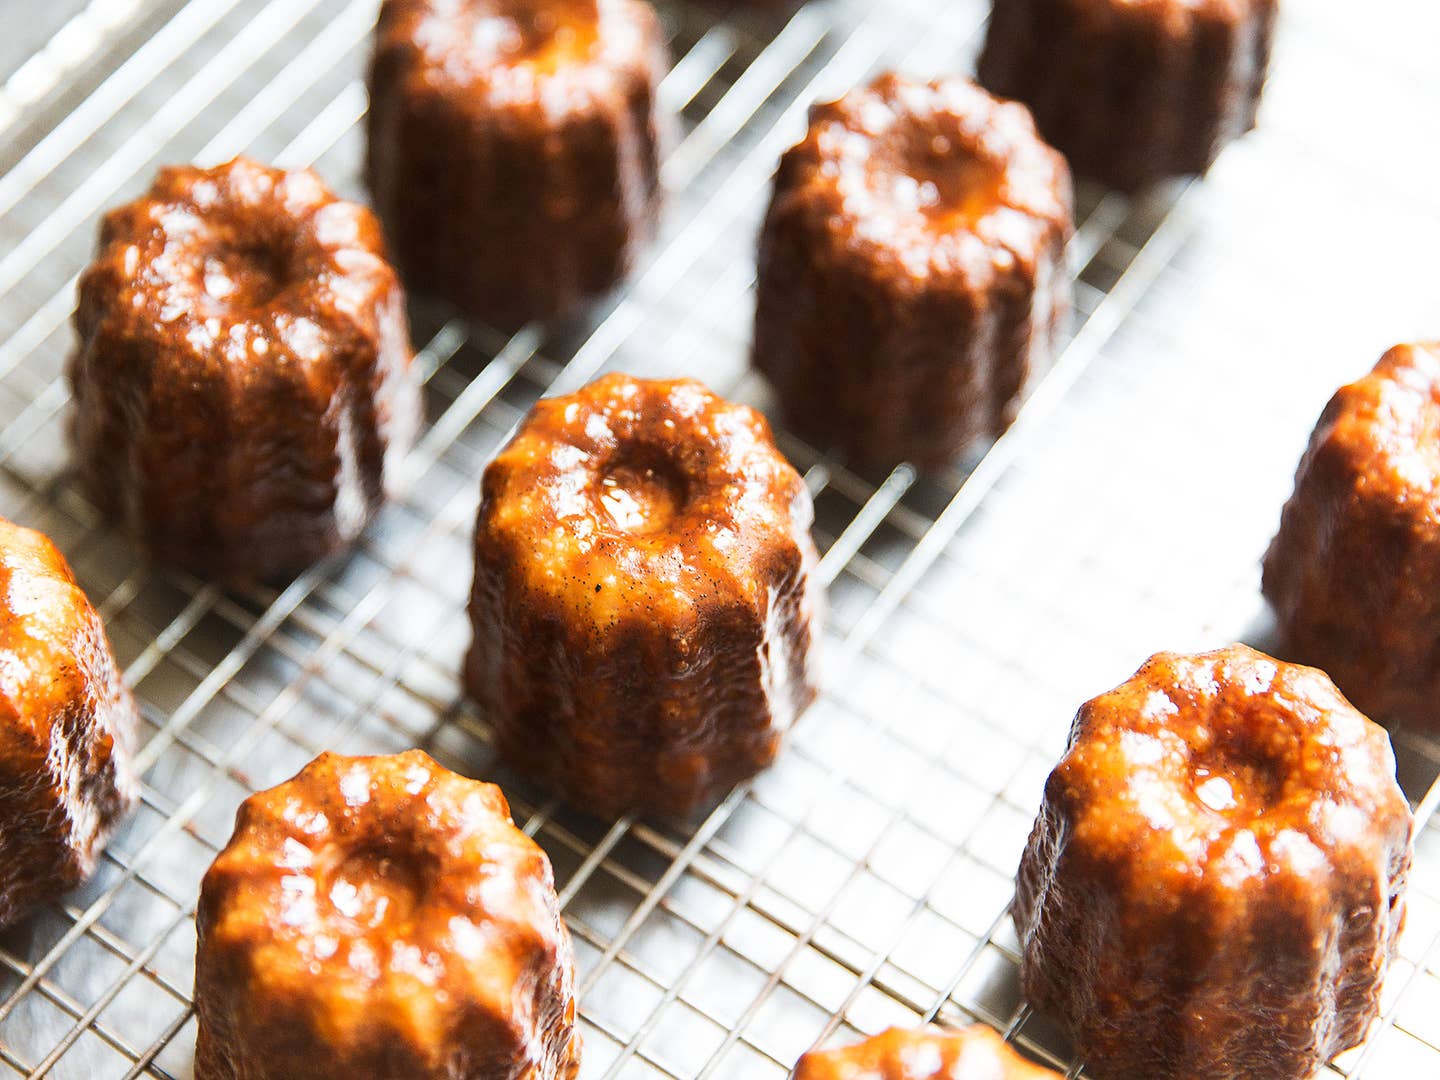 Diary of a Canelé Obsessive: The Decades-Long Quest to Bake the Perfect French Pastry